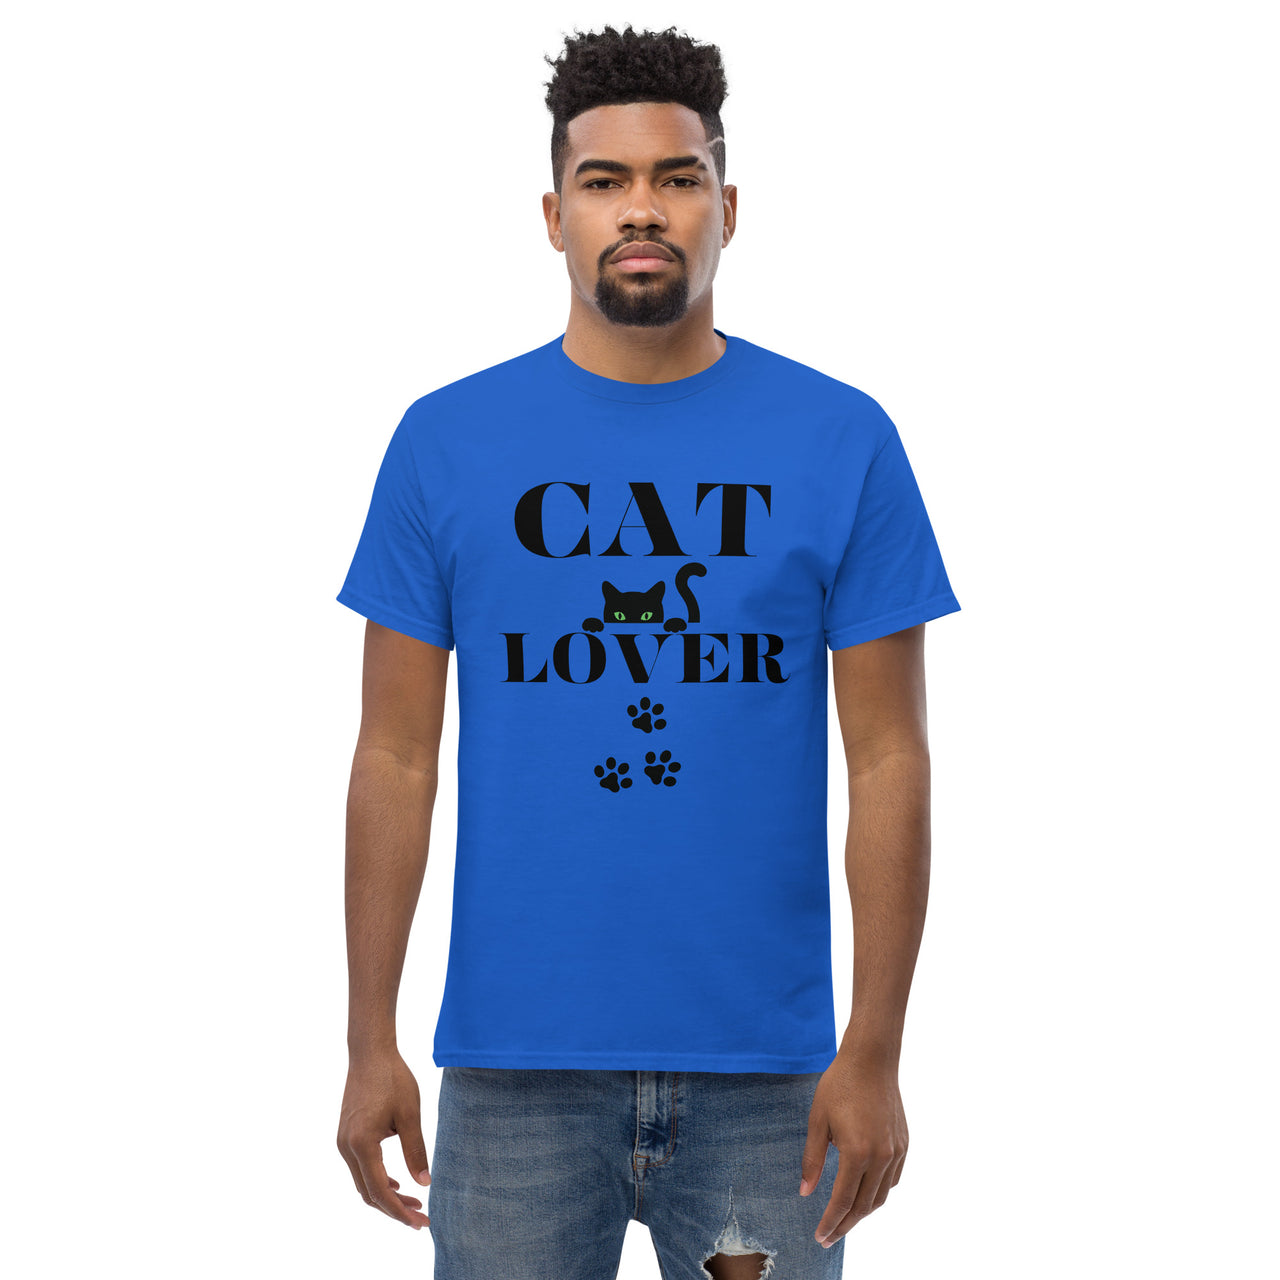 Crazy Cat Lady Cat Daddy Unisex Tshirt For Cat Lovers - Cat Mom - Pet Lover